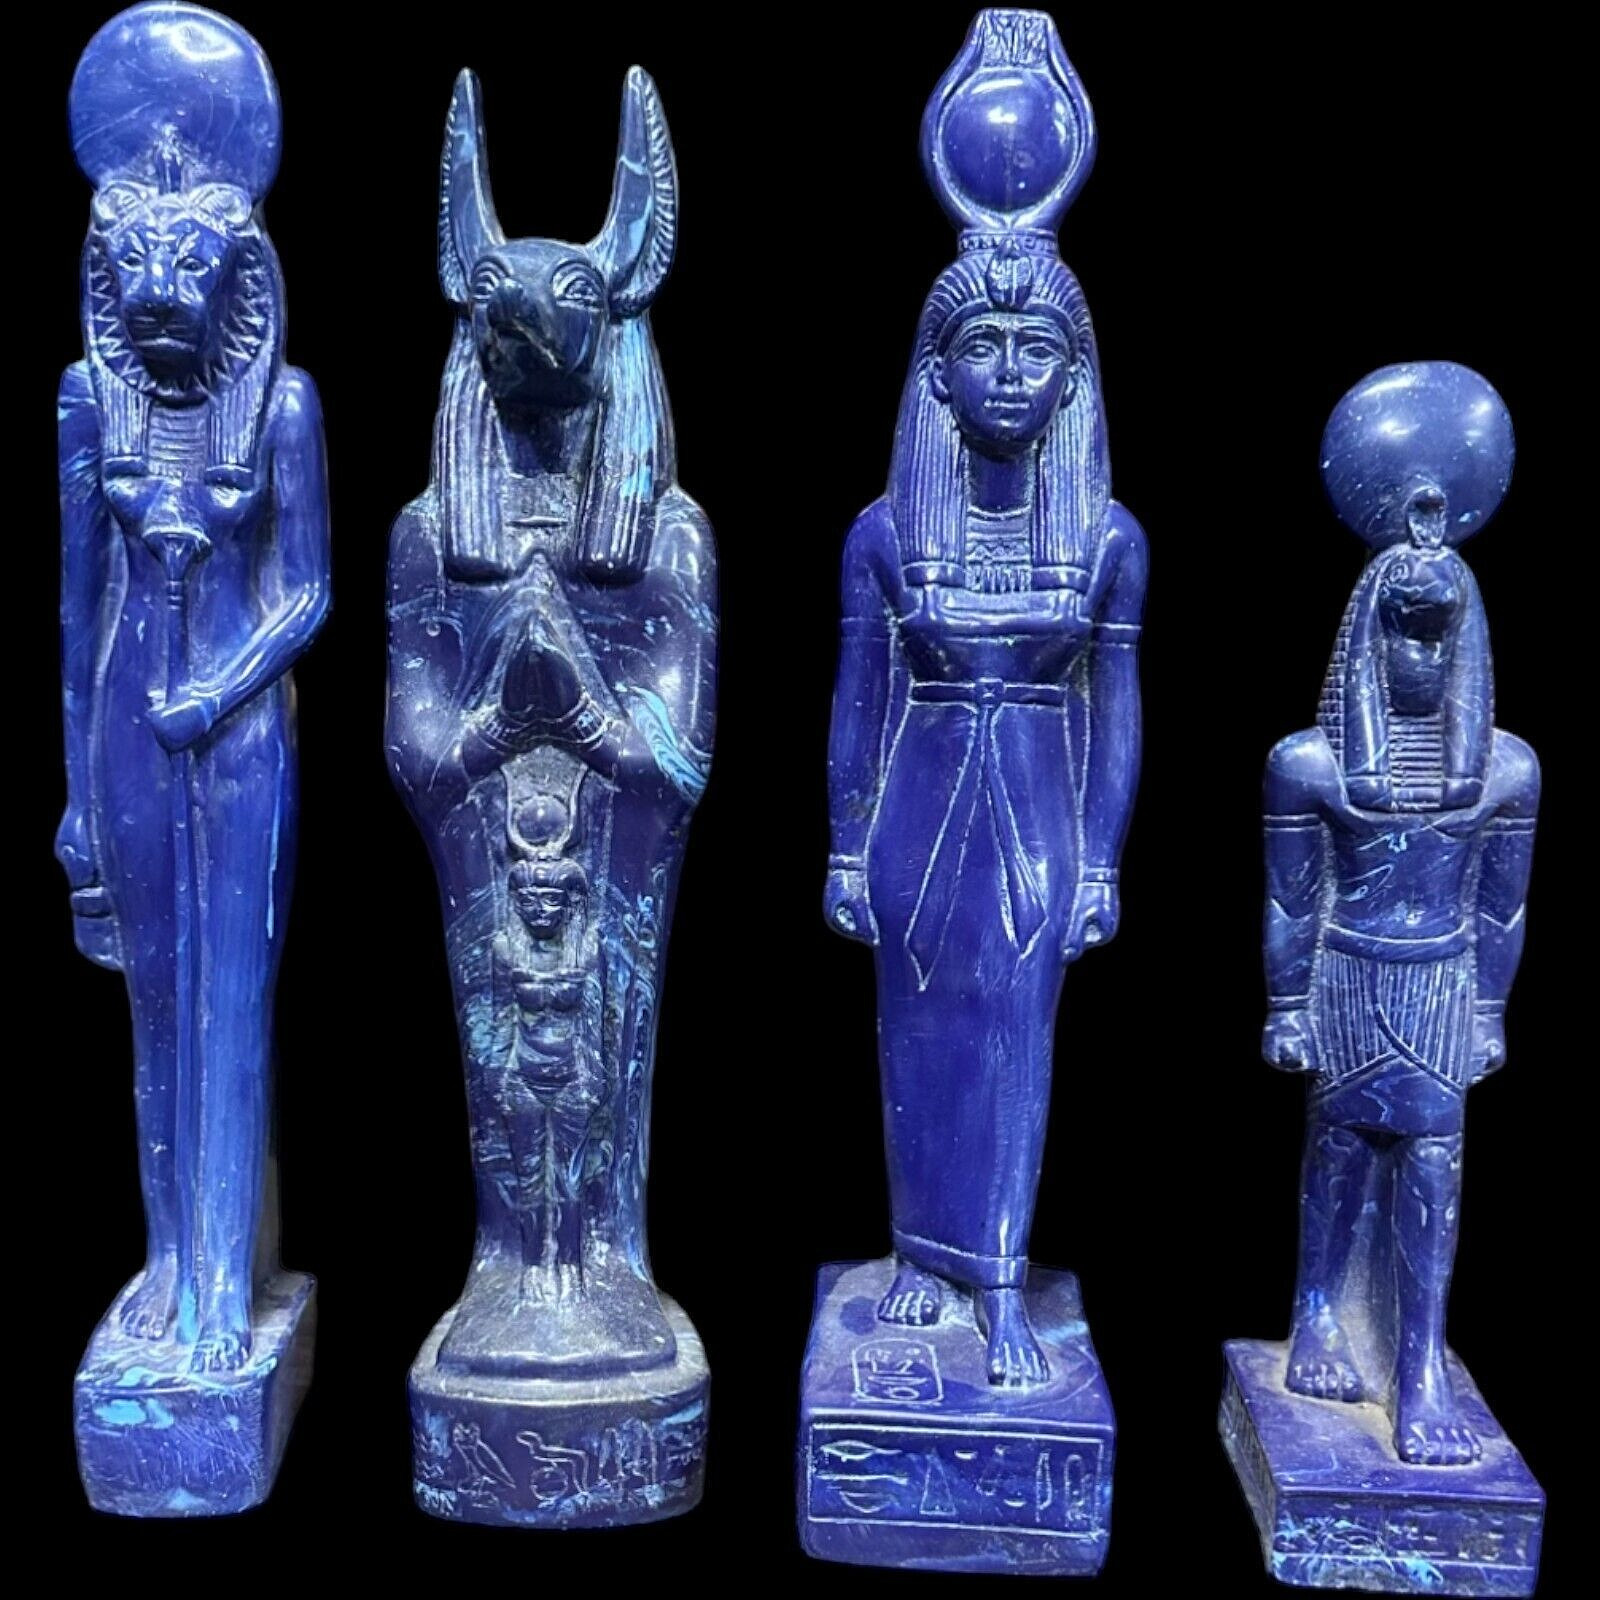 RARE ANCIENT EGYPTIAN ANTIQUES 4 Statues Of God Anubis, Thoth, Isis & Sekhmet BC